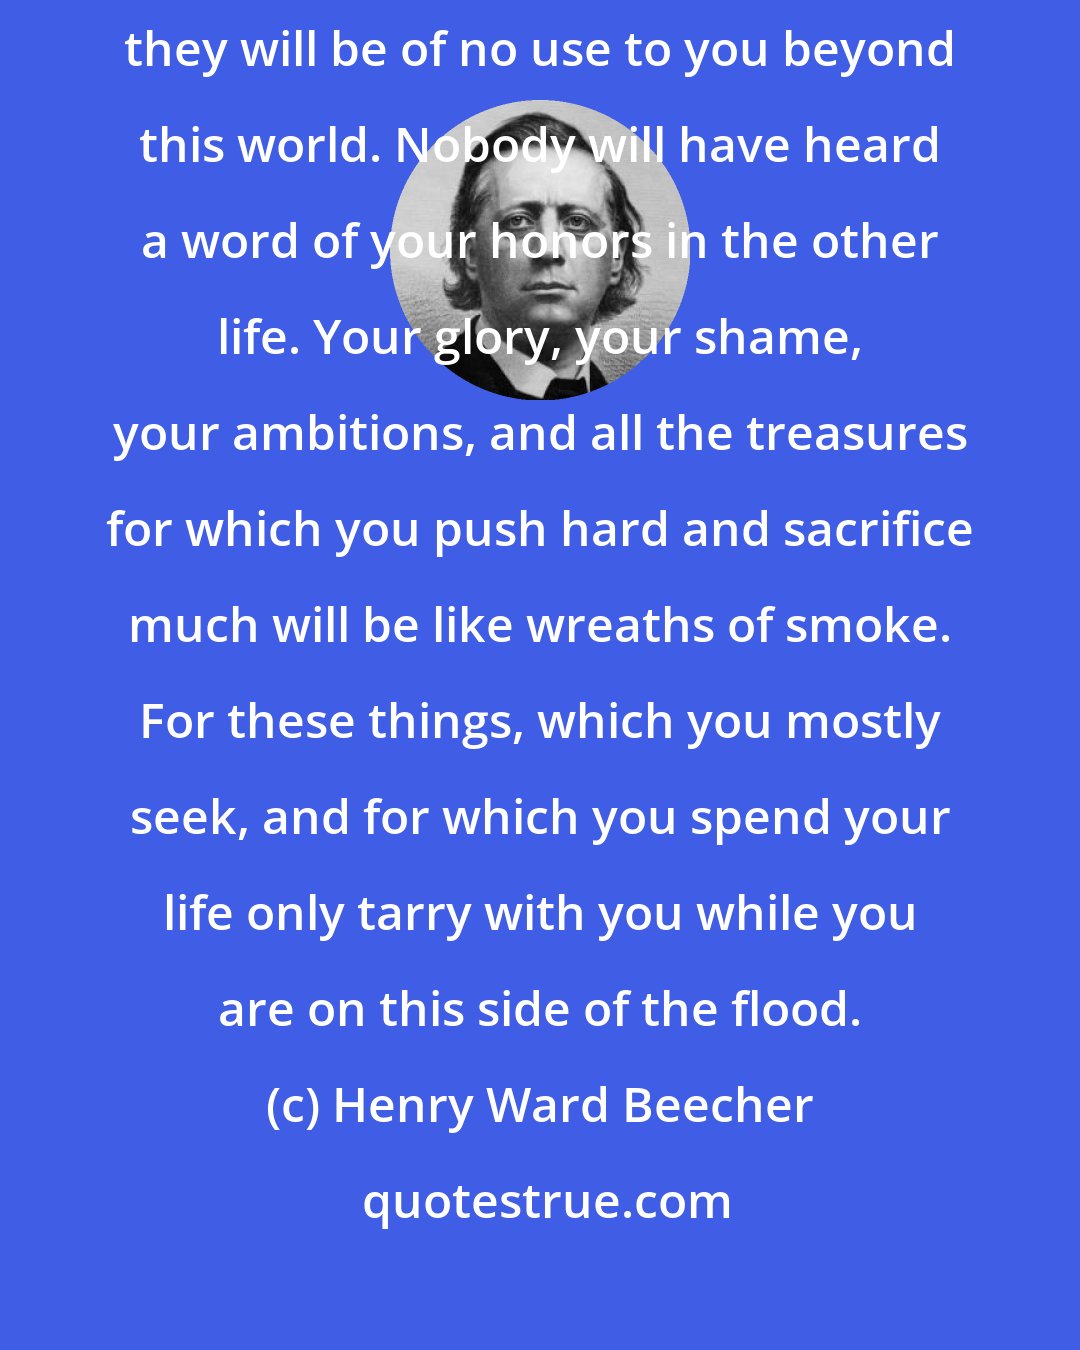 Henry Ward Beecher: Your honors here may serve you for a time, as it were for an hour, but they will be of no use to you beyond this world. Nobody will have heard a word of your honors in the other life. Your glory, your shame, your ambitions, and all the treasures for which you push hard and sacrifice much will be like wreaths of smoke. For these things, which you mostly seek, and for which you spend your life only tarry with you while you are on this side of the flood.